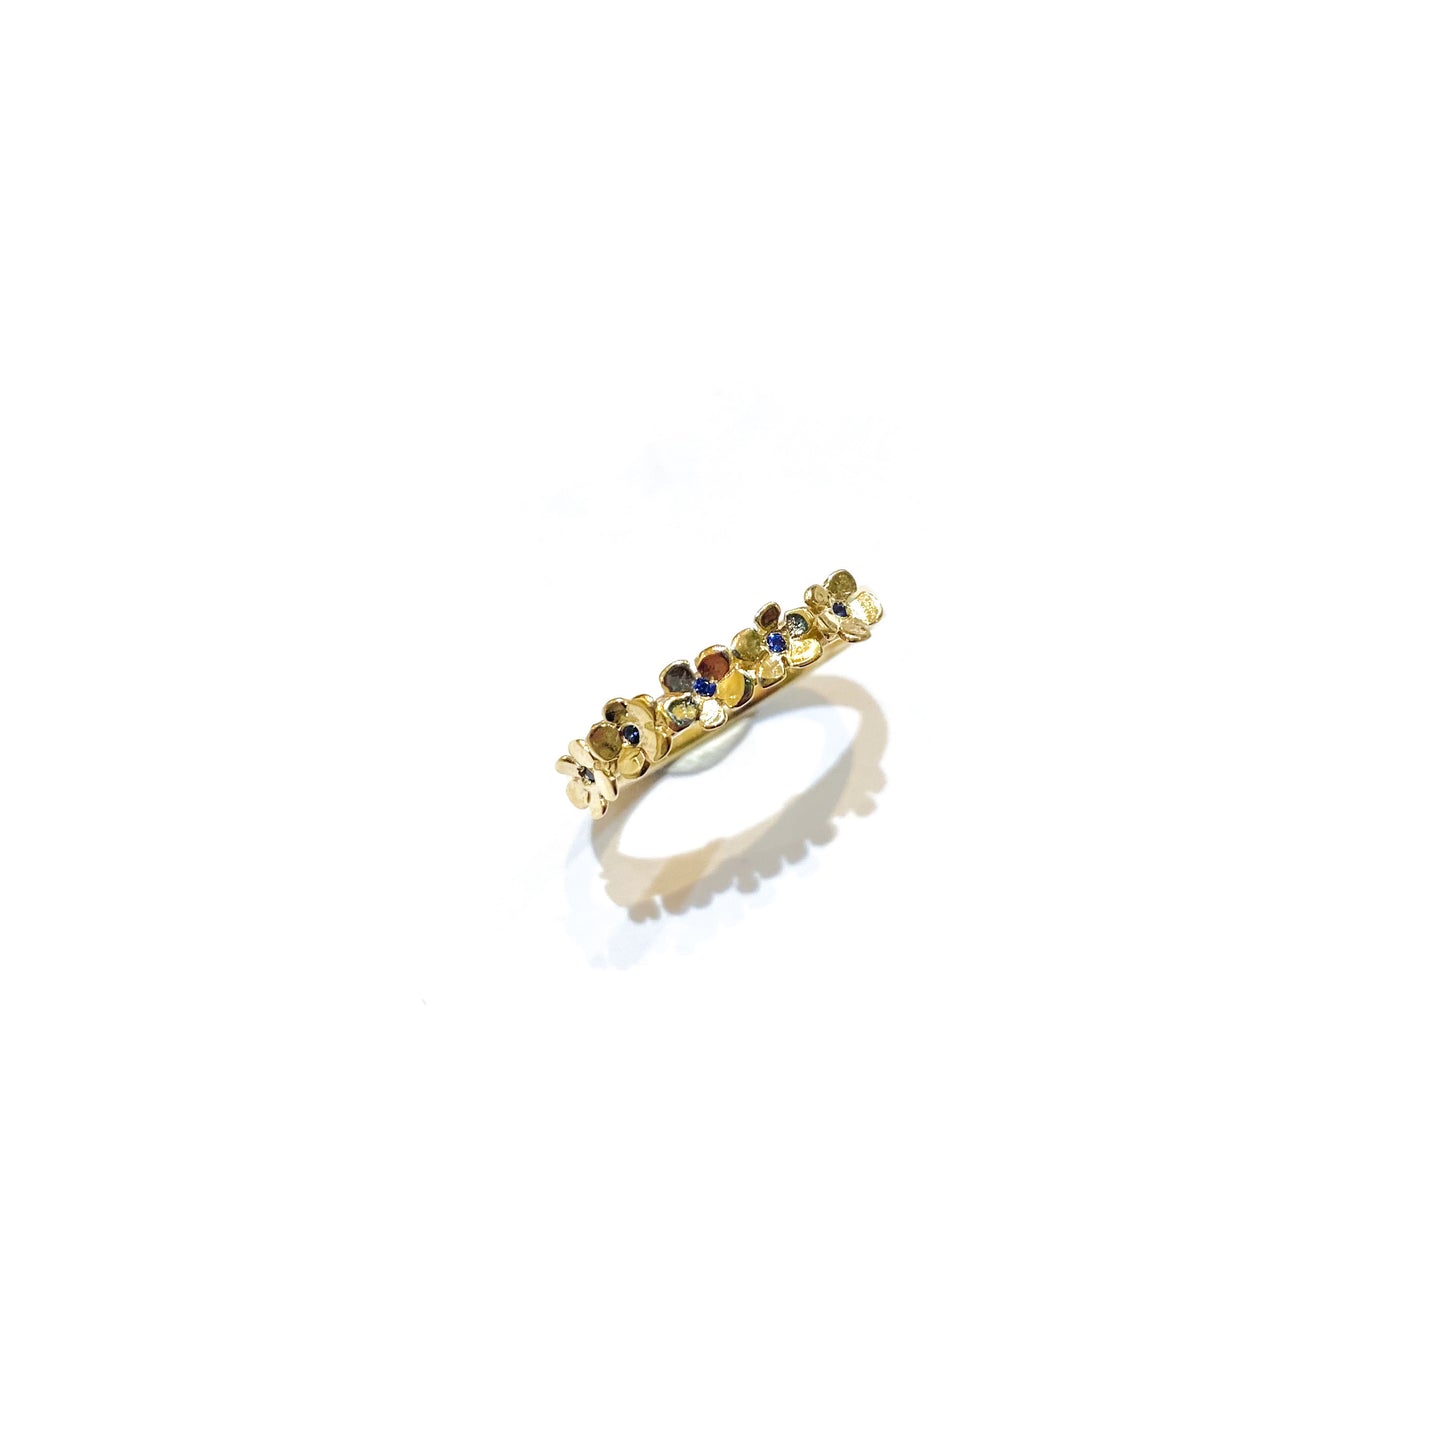 Flower Ring | Gold and Silver